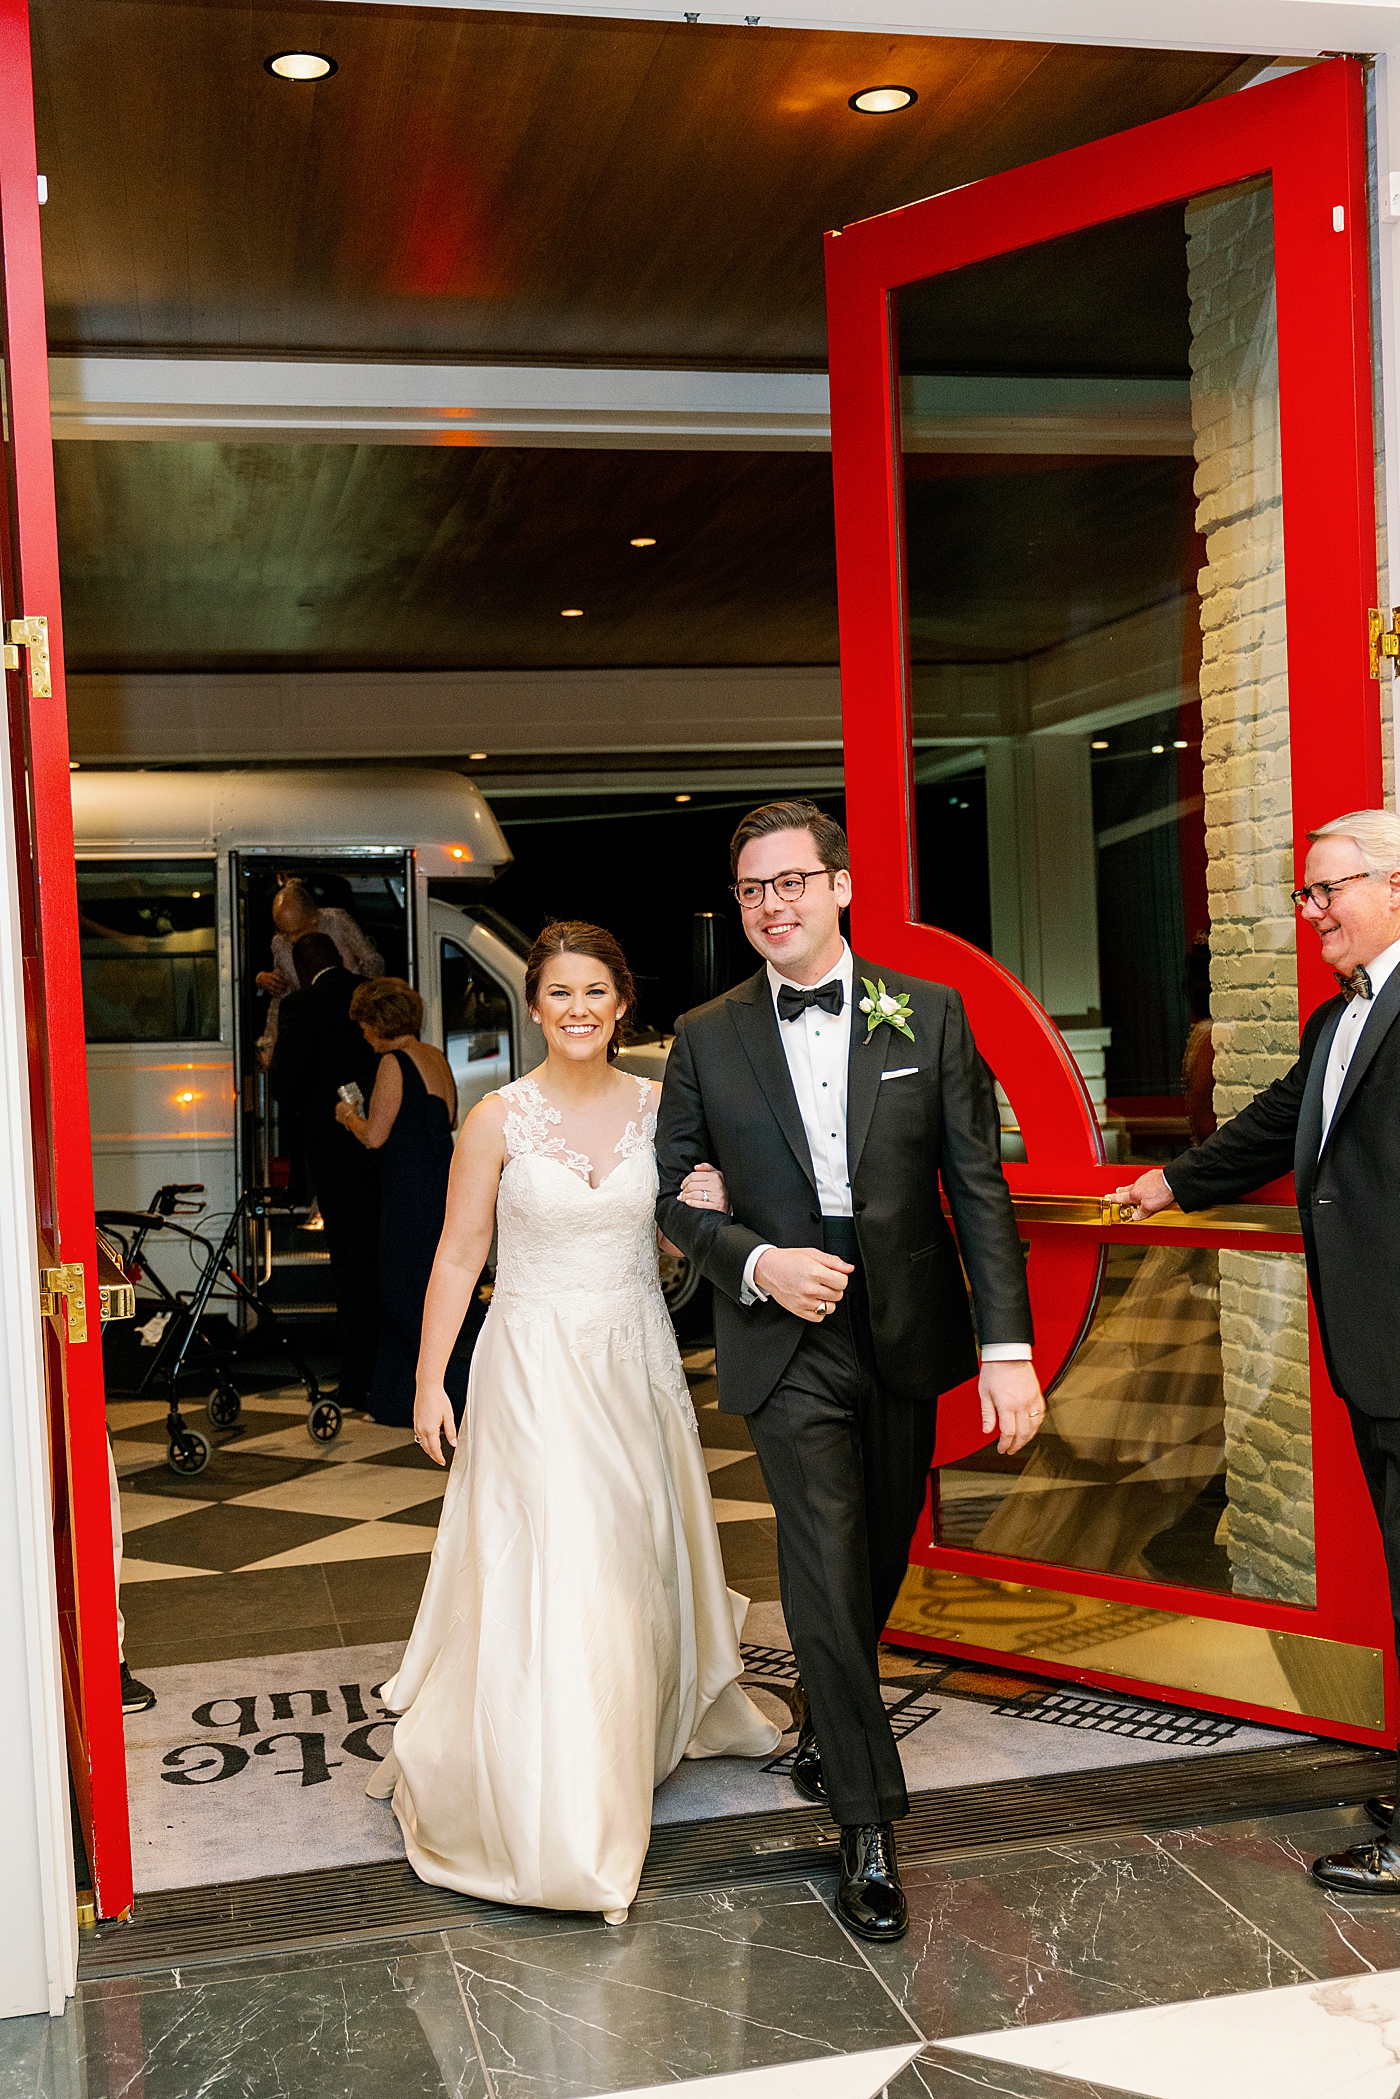 Bride and groom leaving their reception through bright red doors | Photo by Annie Laura Photography